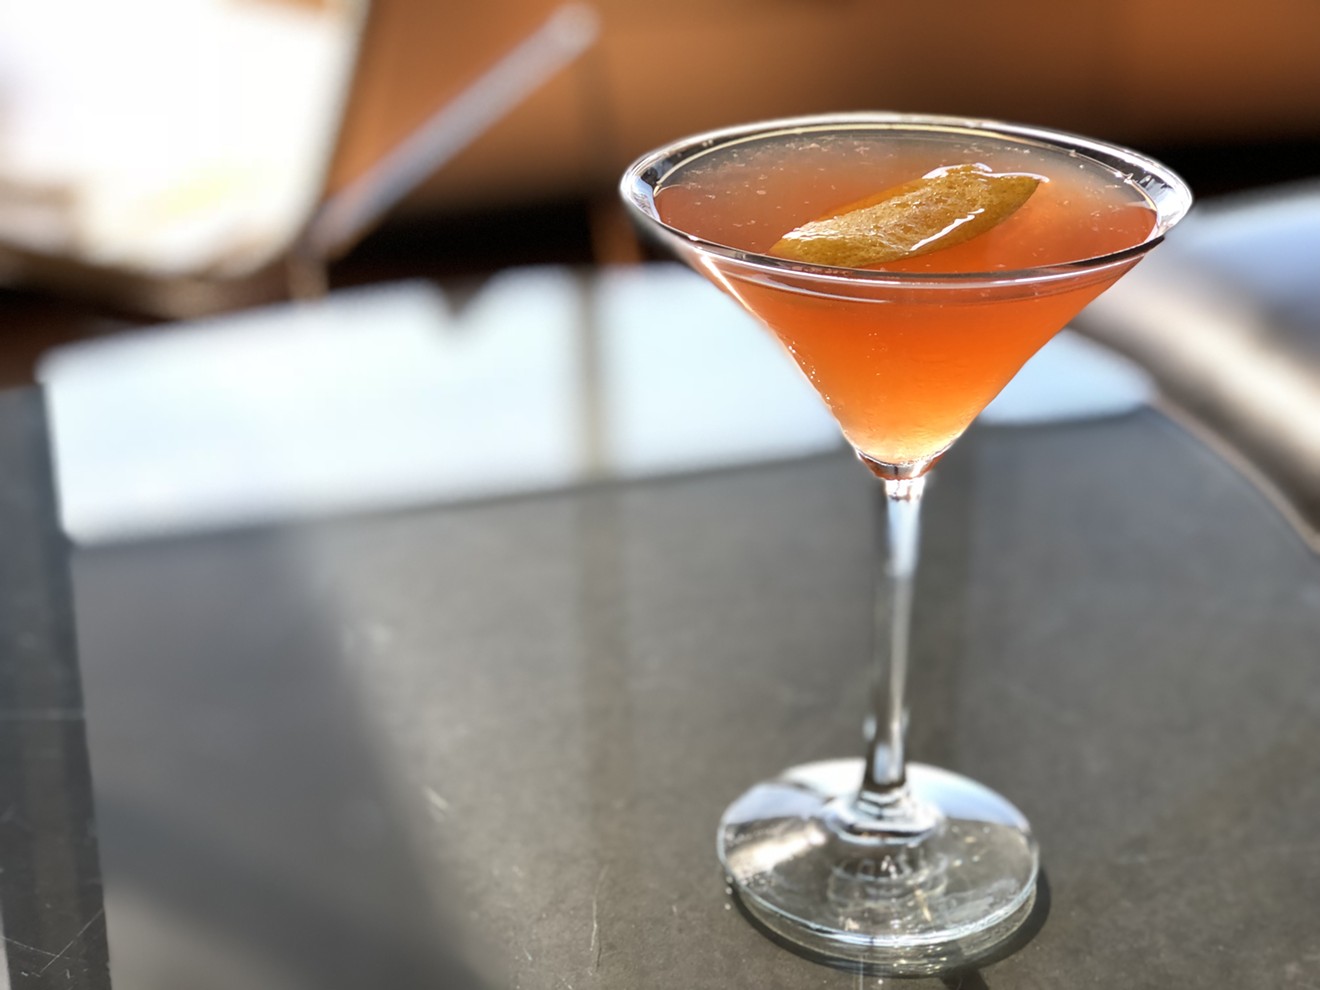 A new cocktail with an old ingredient that seems to work just fine.